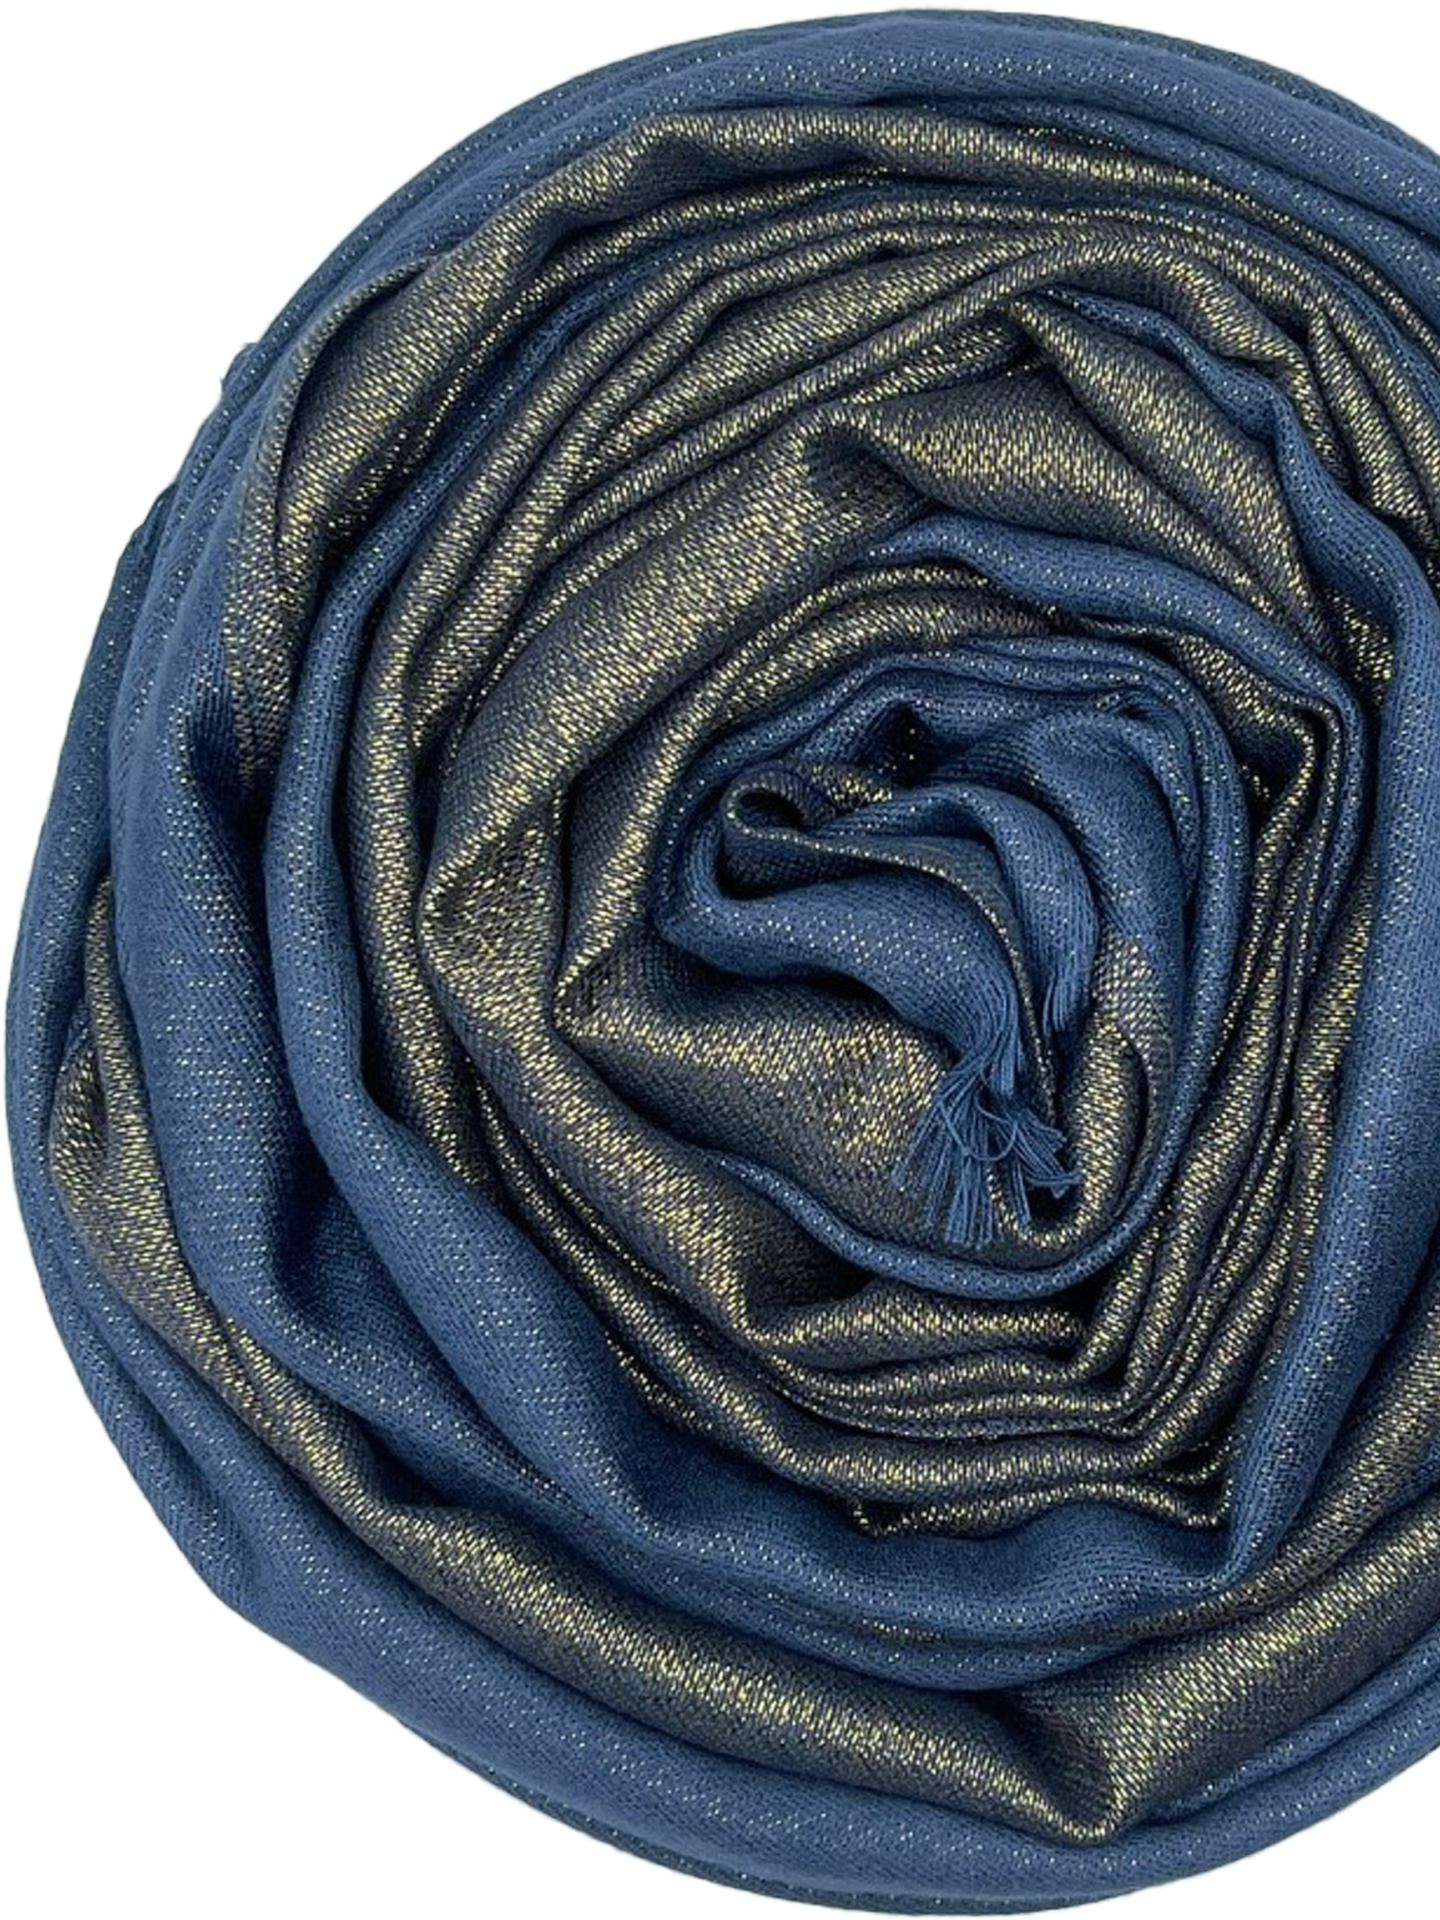 Glamour Scarf - seablue with gold